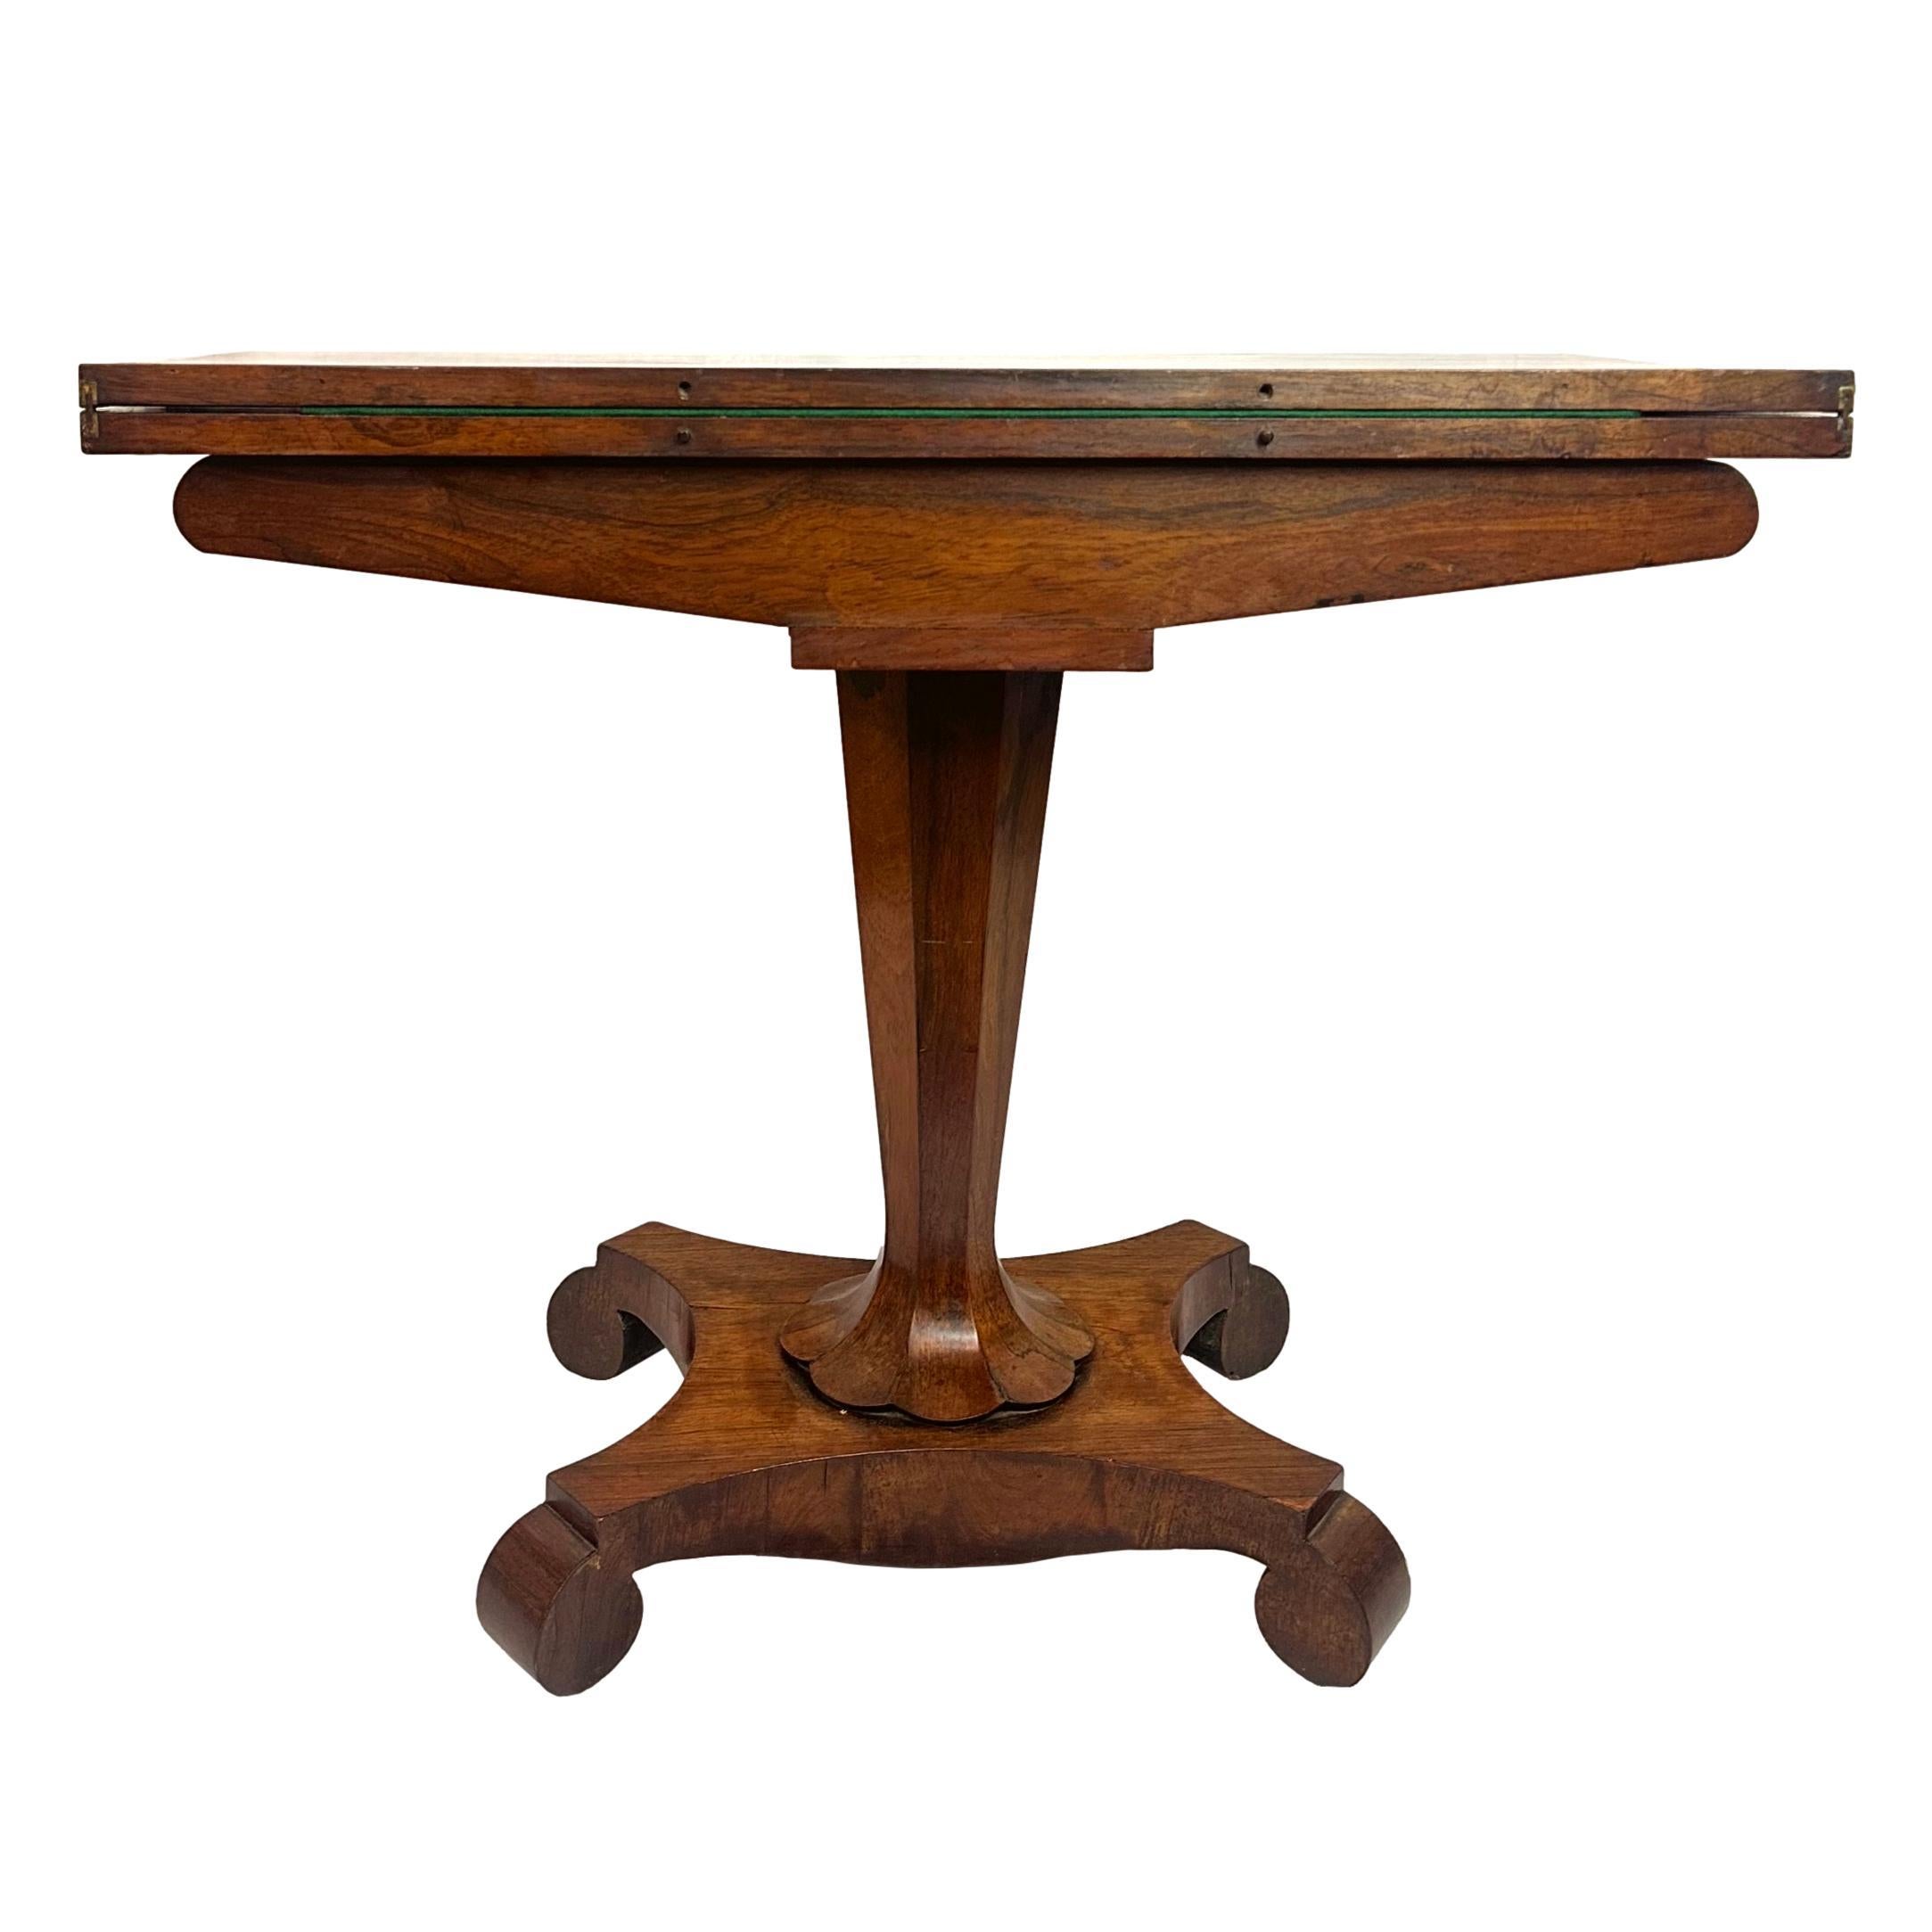 Mid-19th Century An Antique William IV Rosewood Period Card Table & Side Table, English, ca. 1835 For Sale